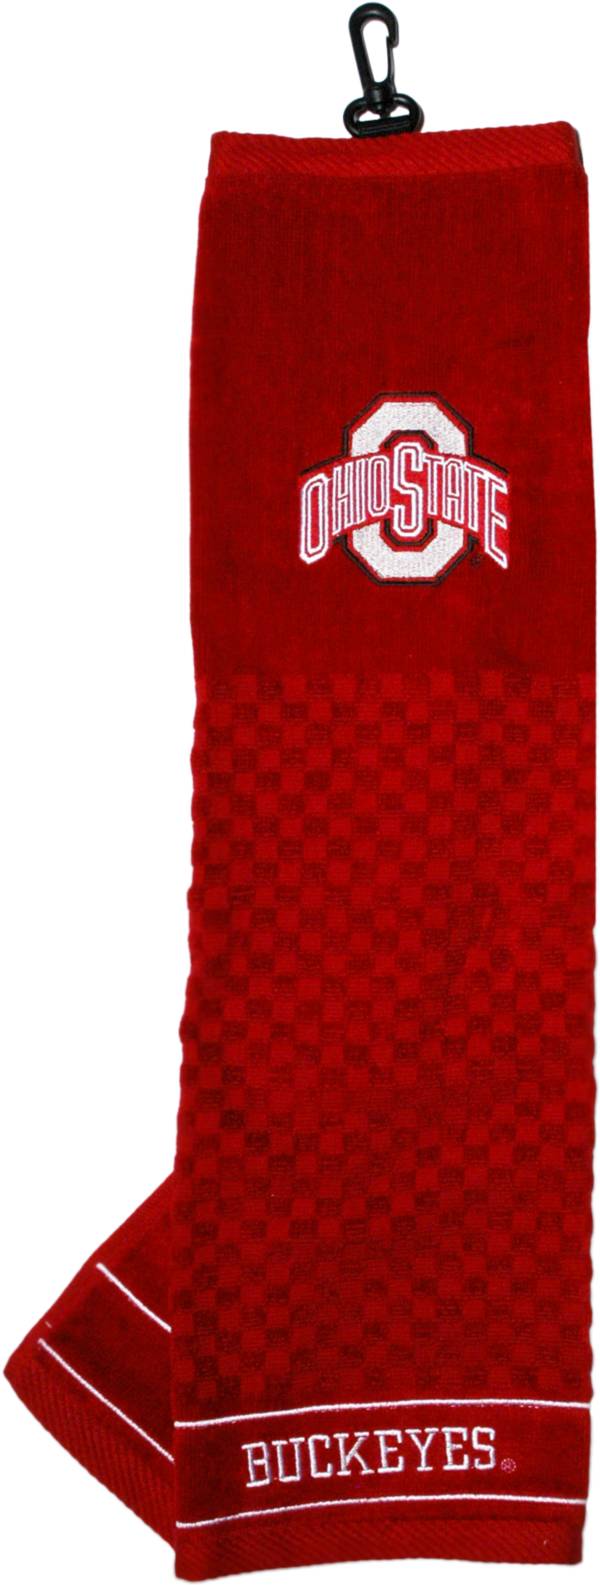 Team Golf Ohio State Buckeyes Embroidered Towel product image